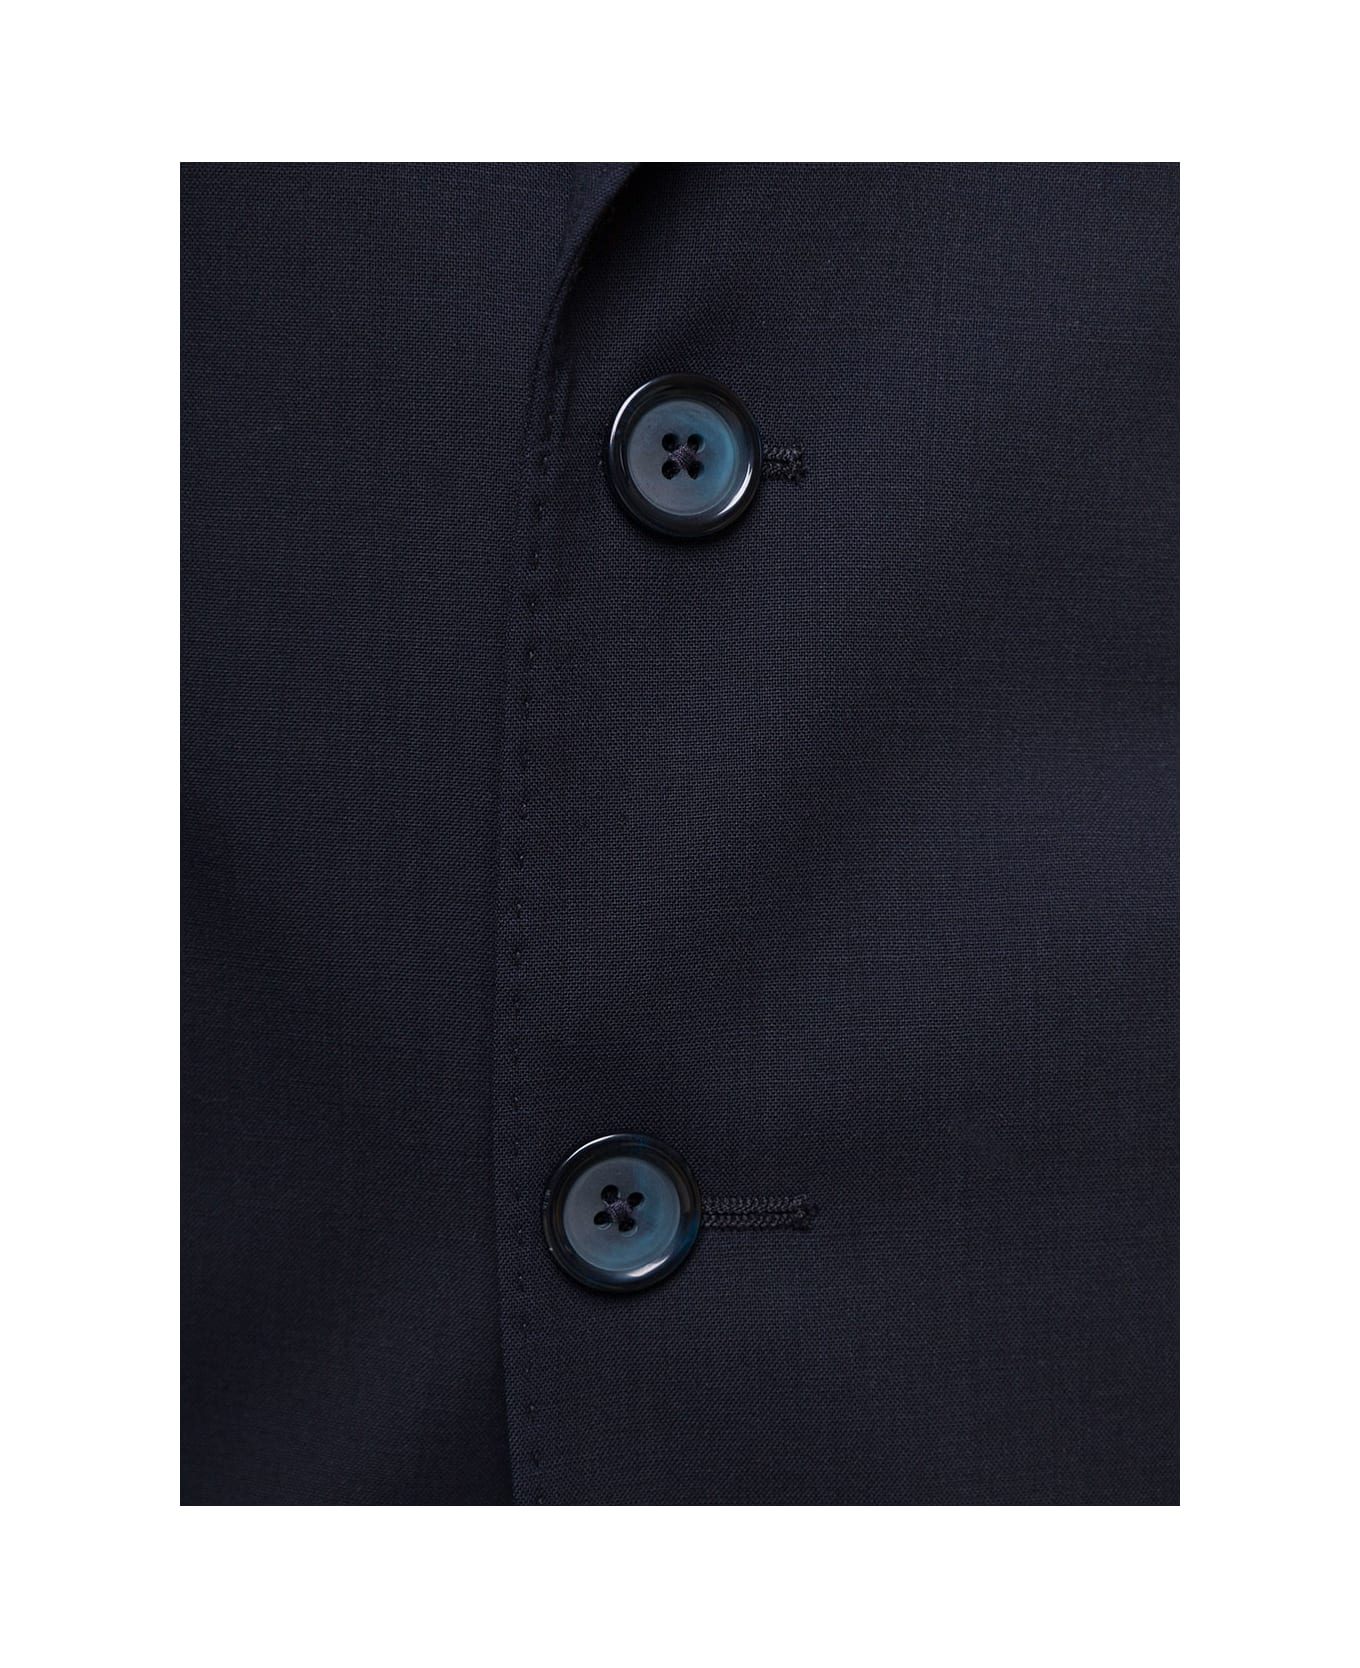 Dolce & Gabbana Blue Essential Suitblazer And argento Trousers  In Wool Man - Blu